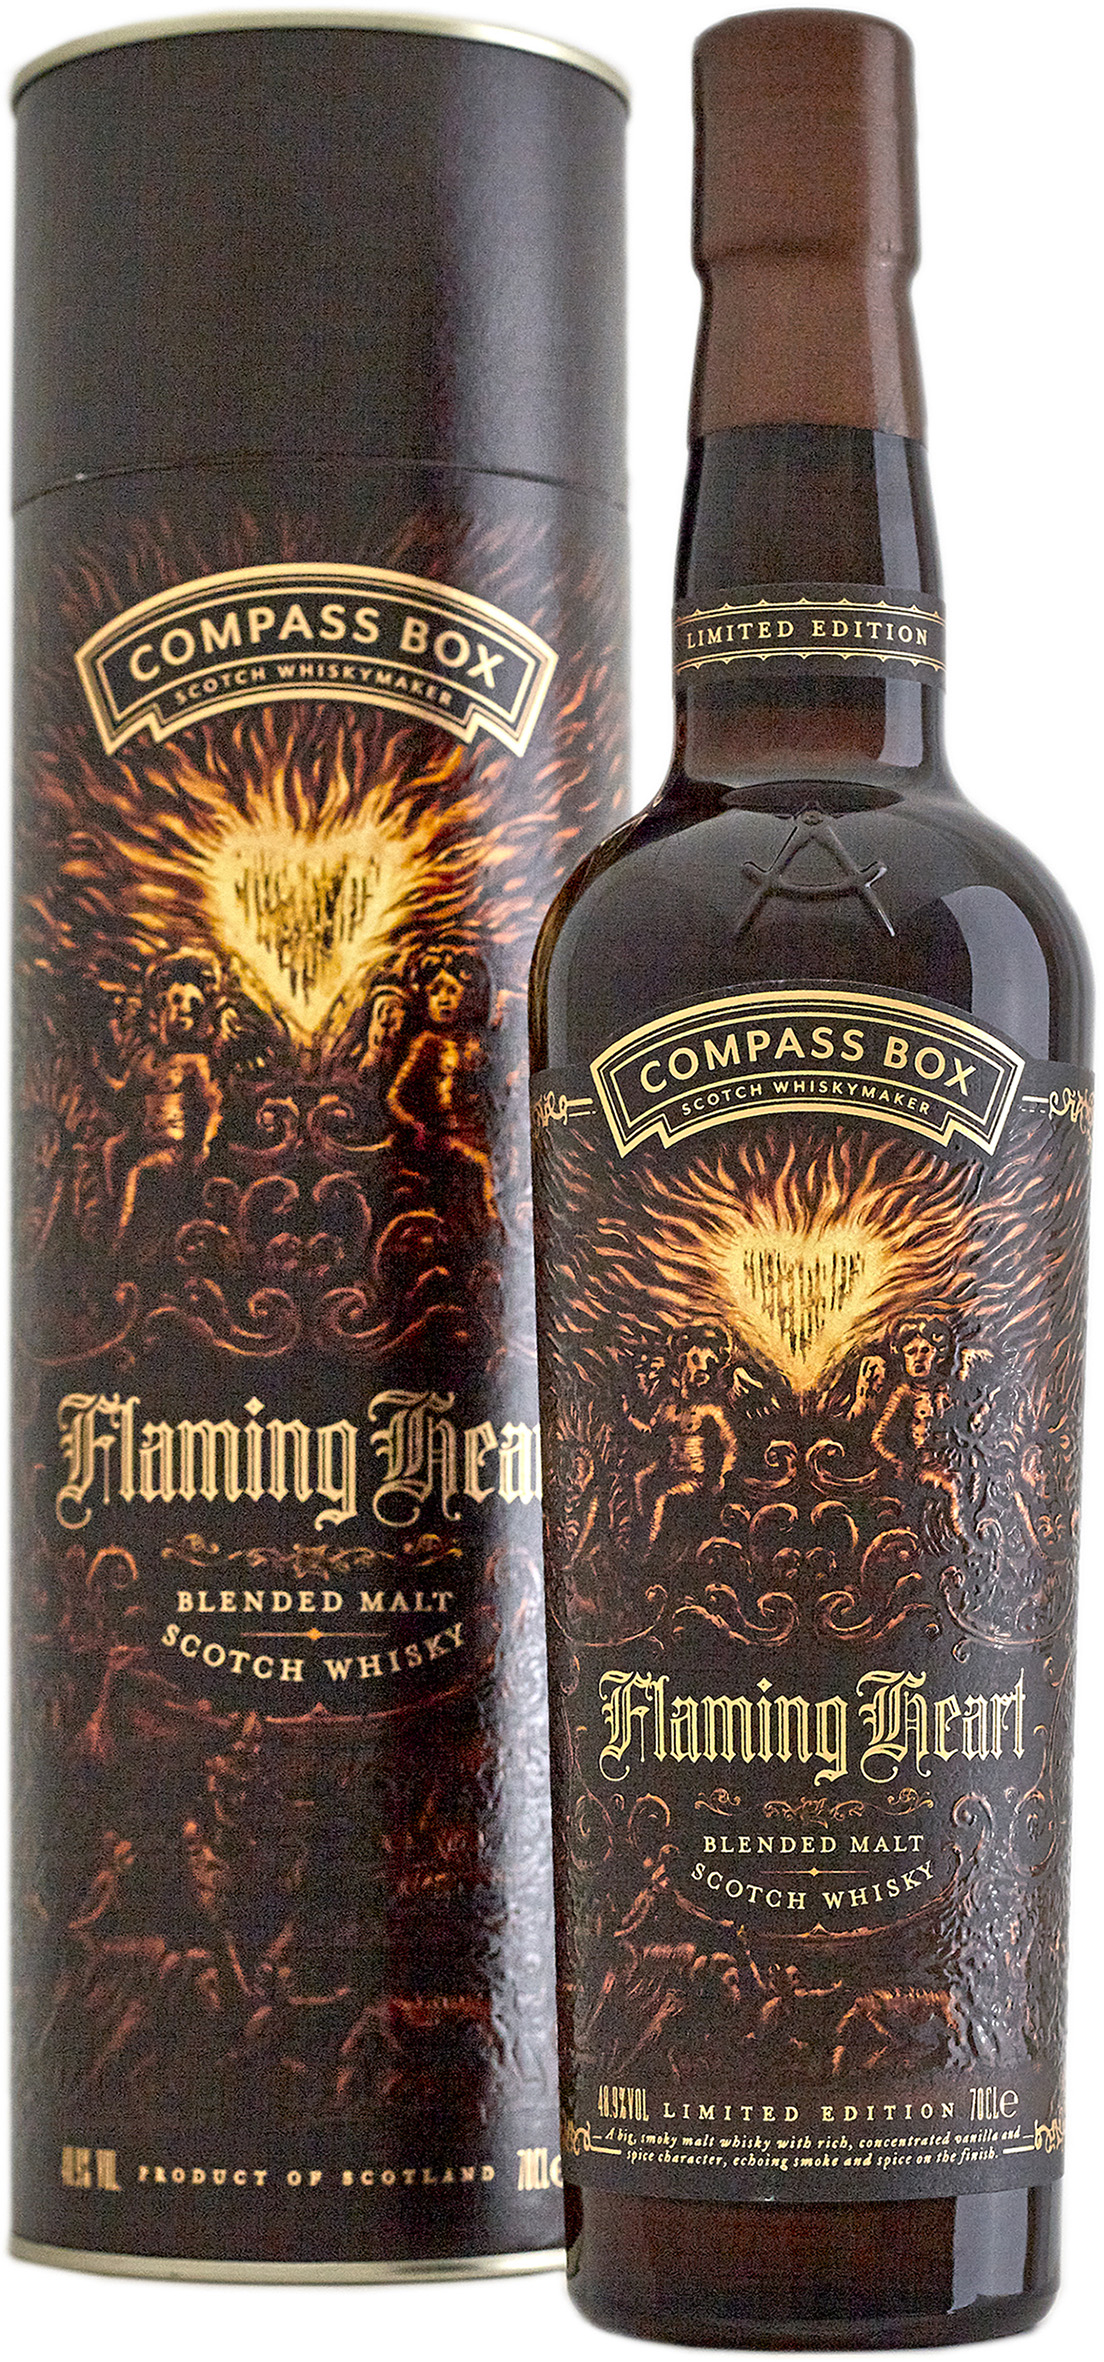 Compass Box Flaming Heart 6th Edition Blended Malt